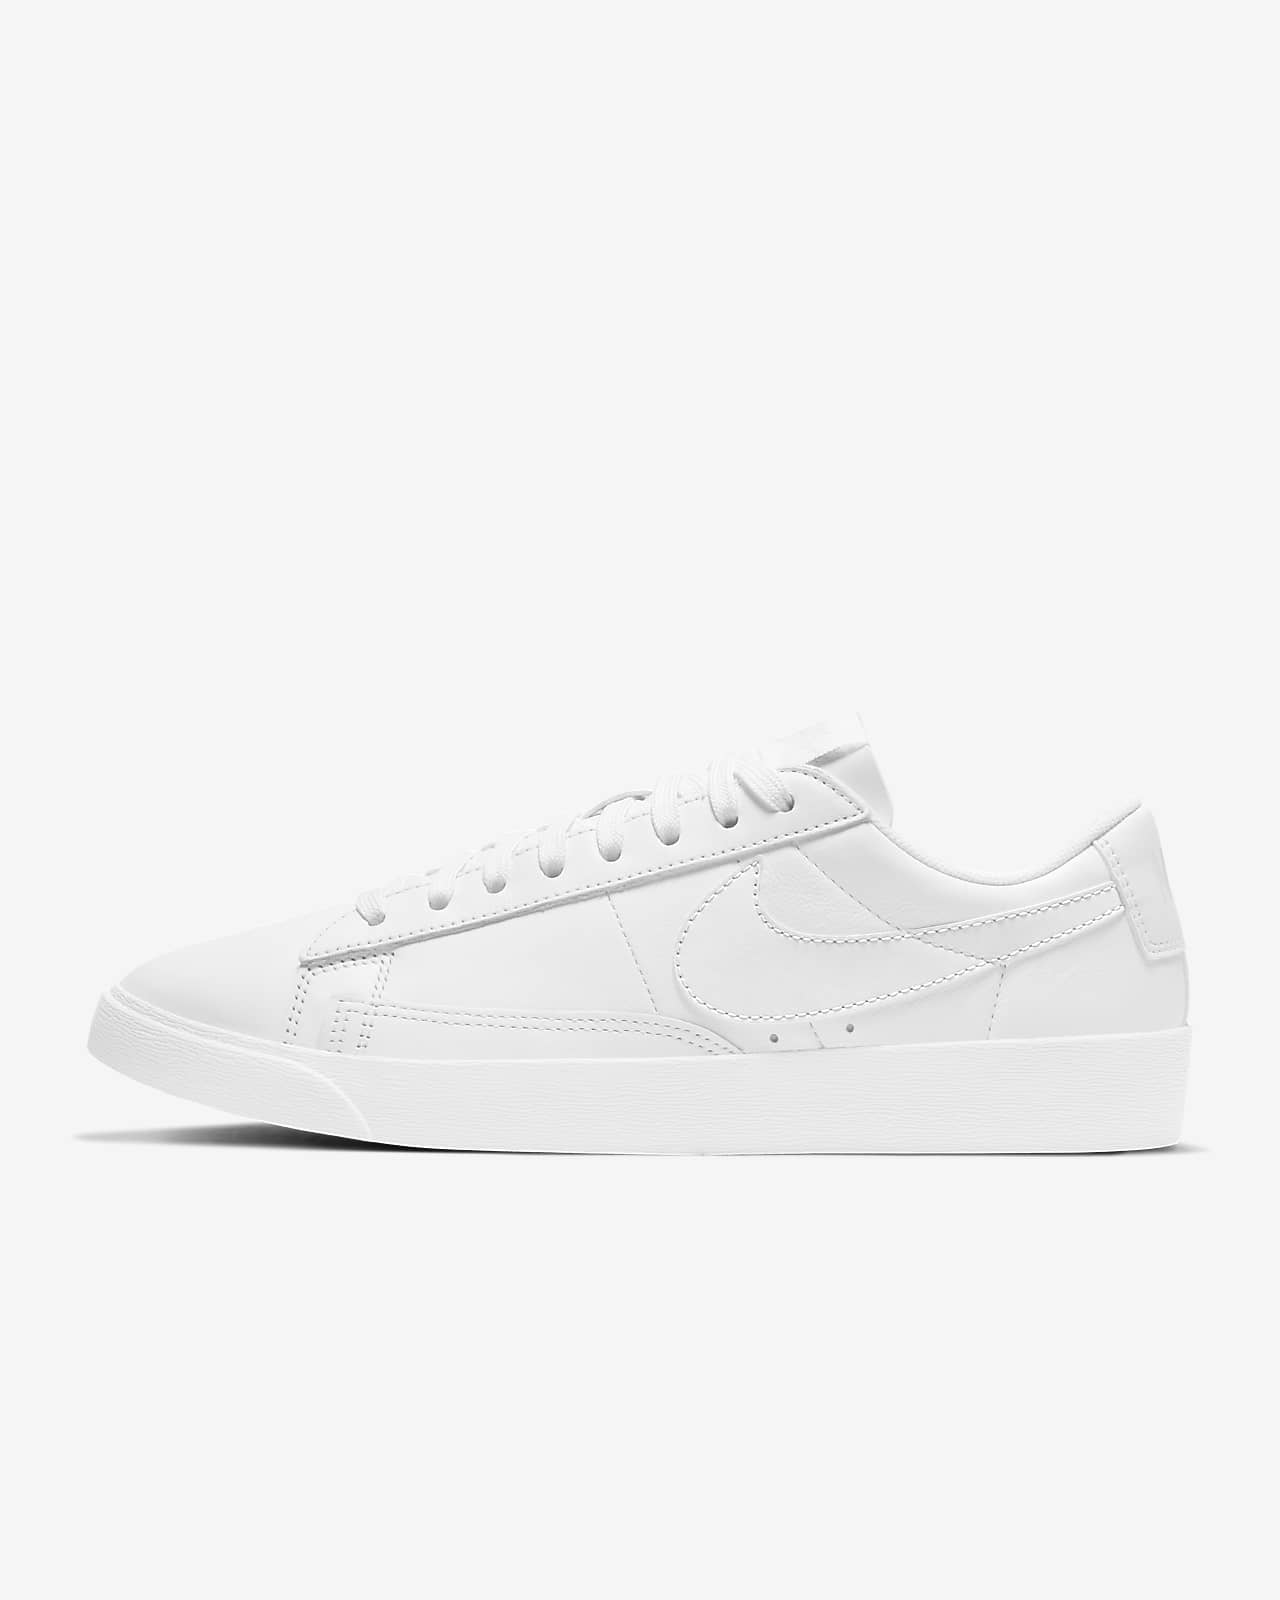 nike white leather shoes womens